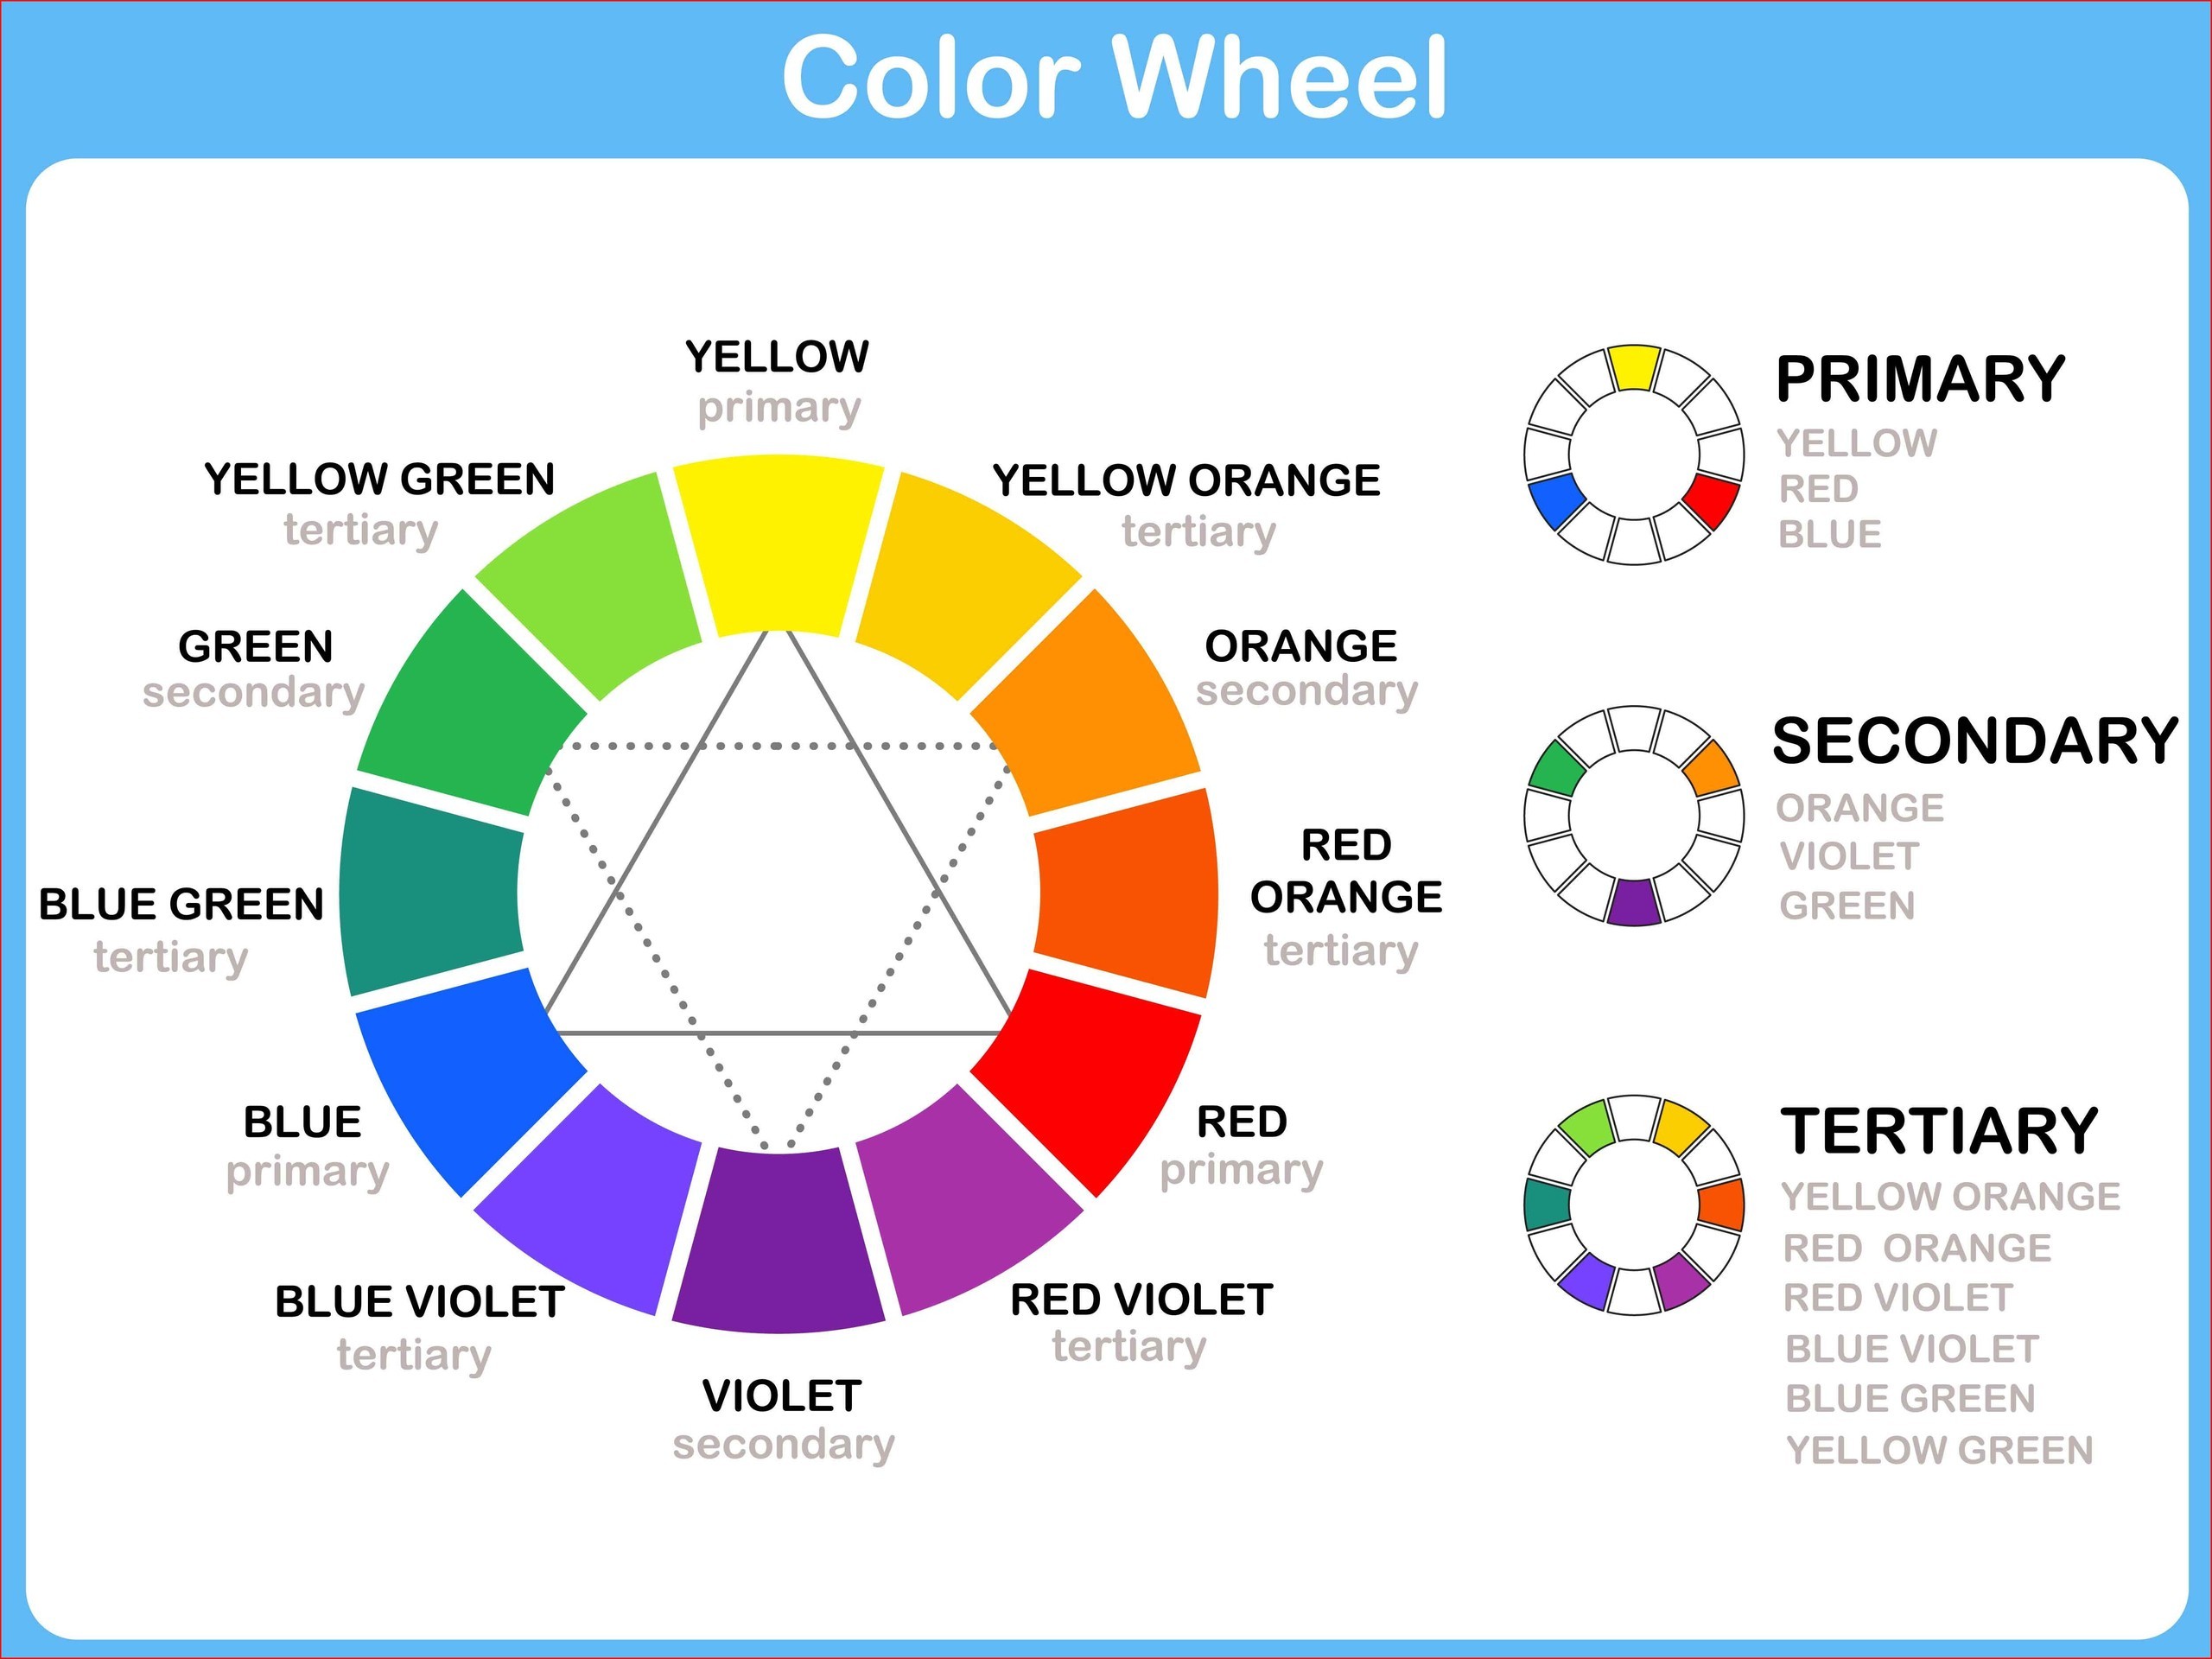 Theory of Color Wheel